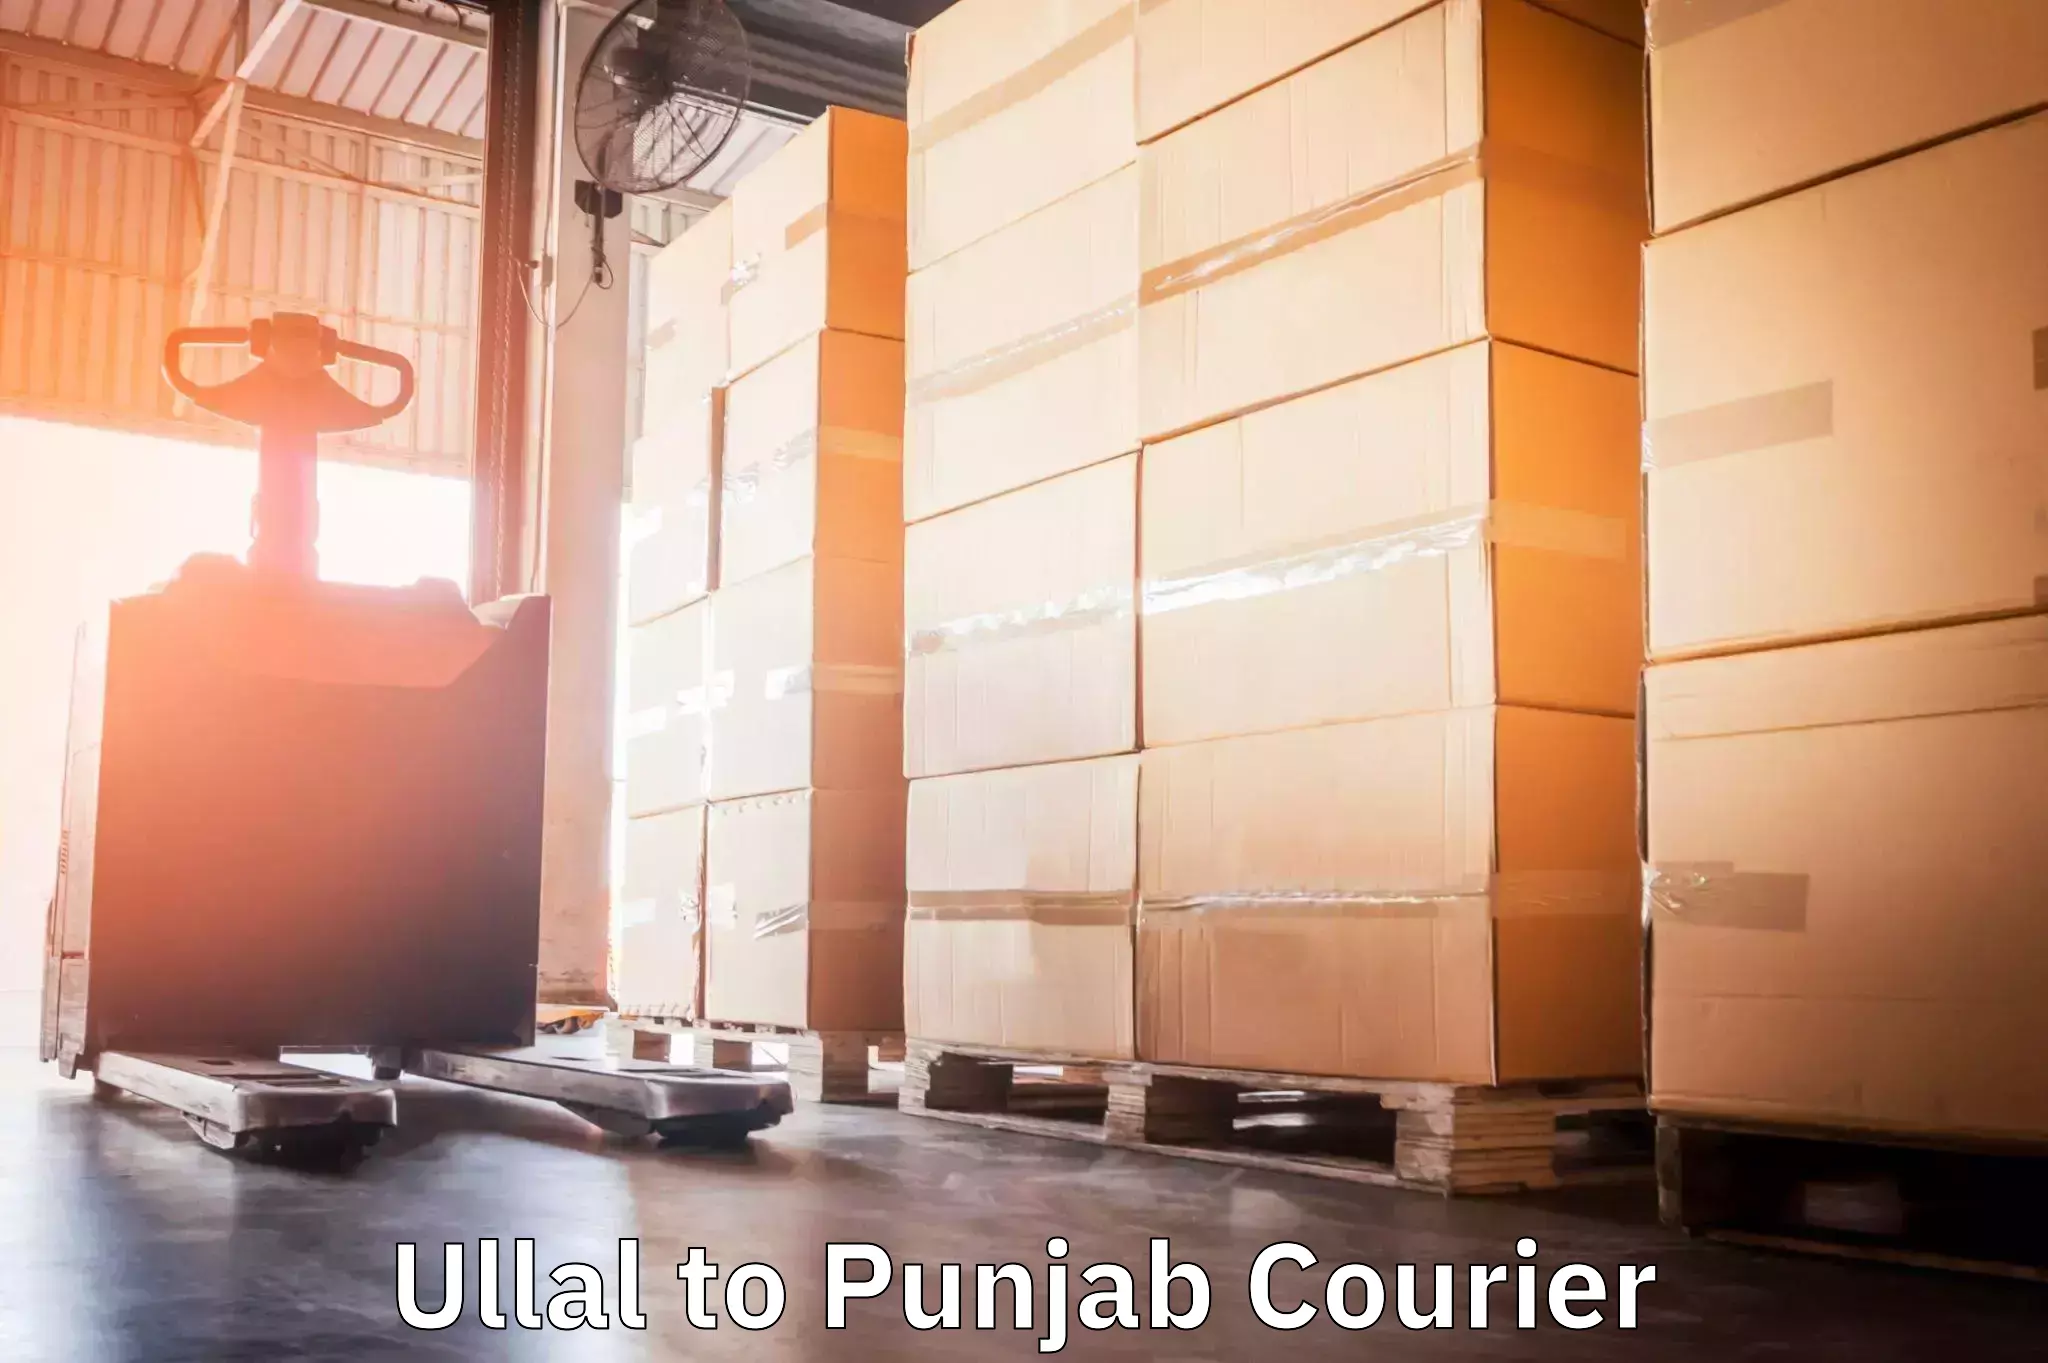 Global courier networks Ullal to Begowal